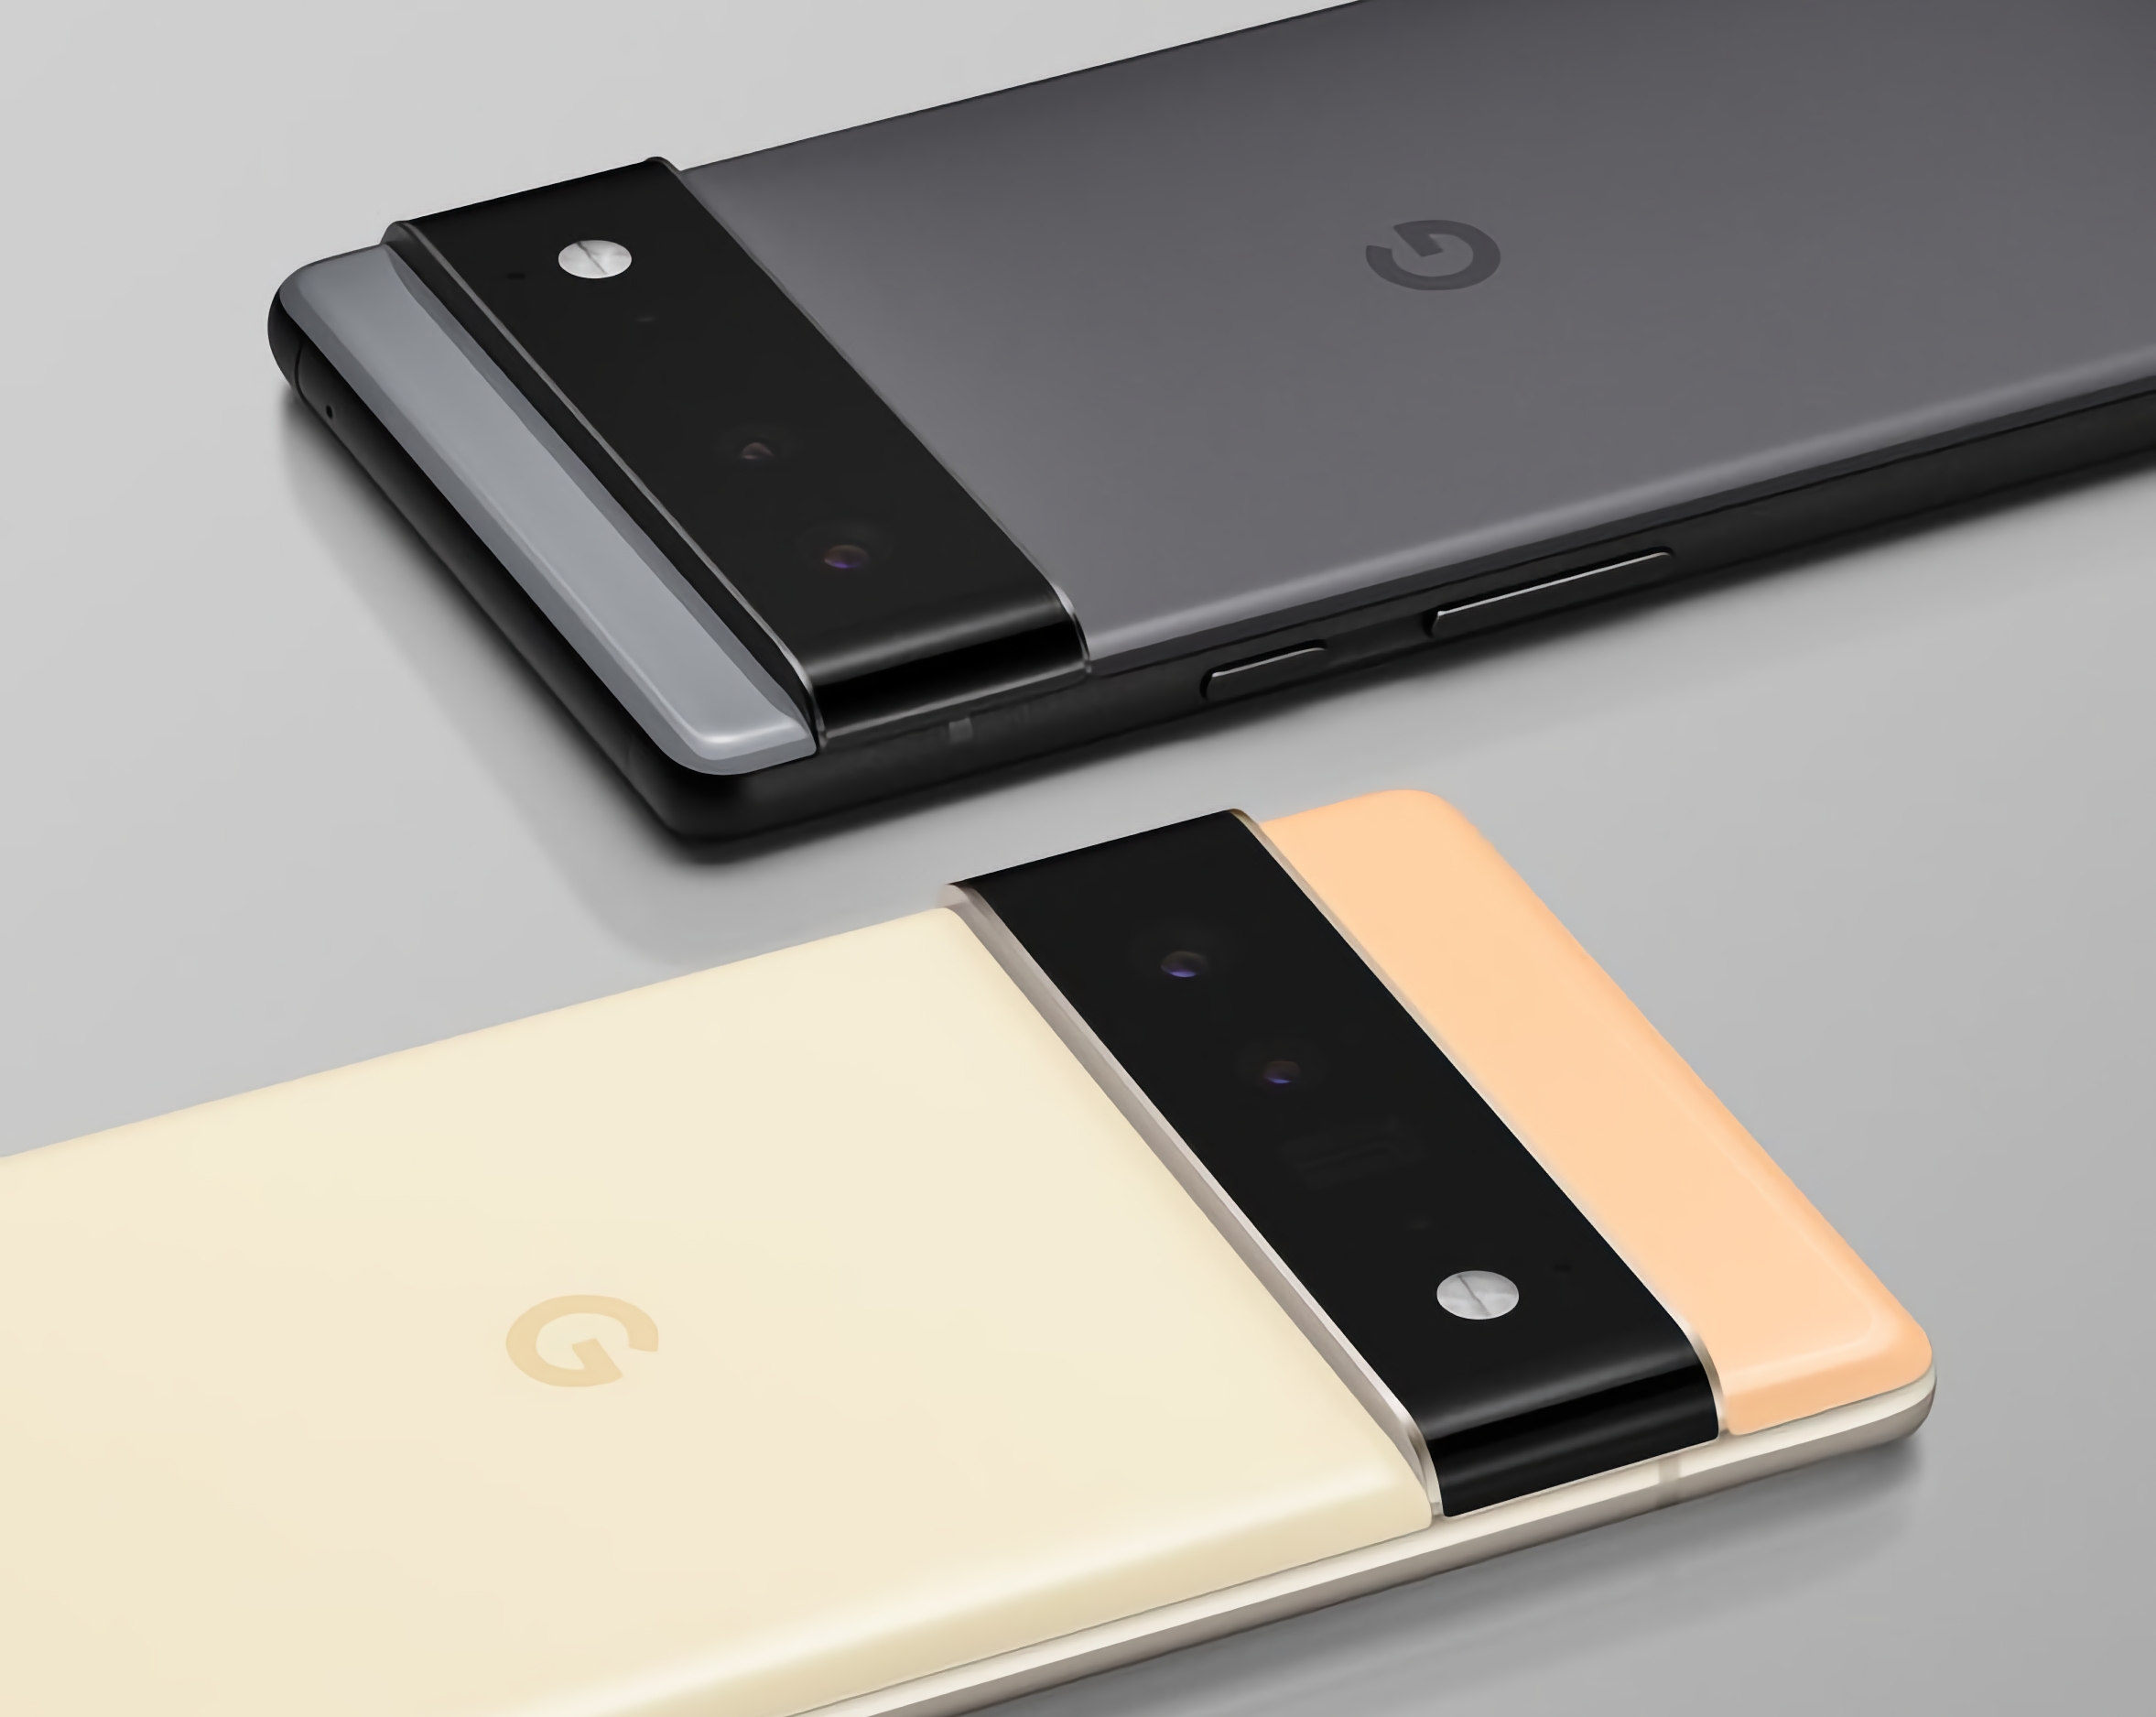 Source: Google Pixel 6 and Google Pixel 6 Pro will get 33W fast charging support